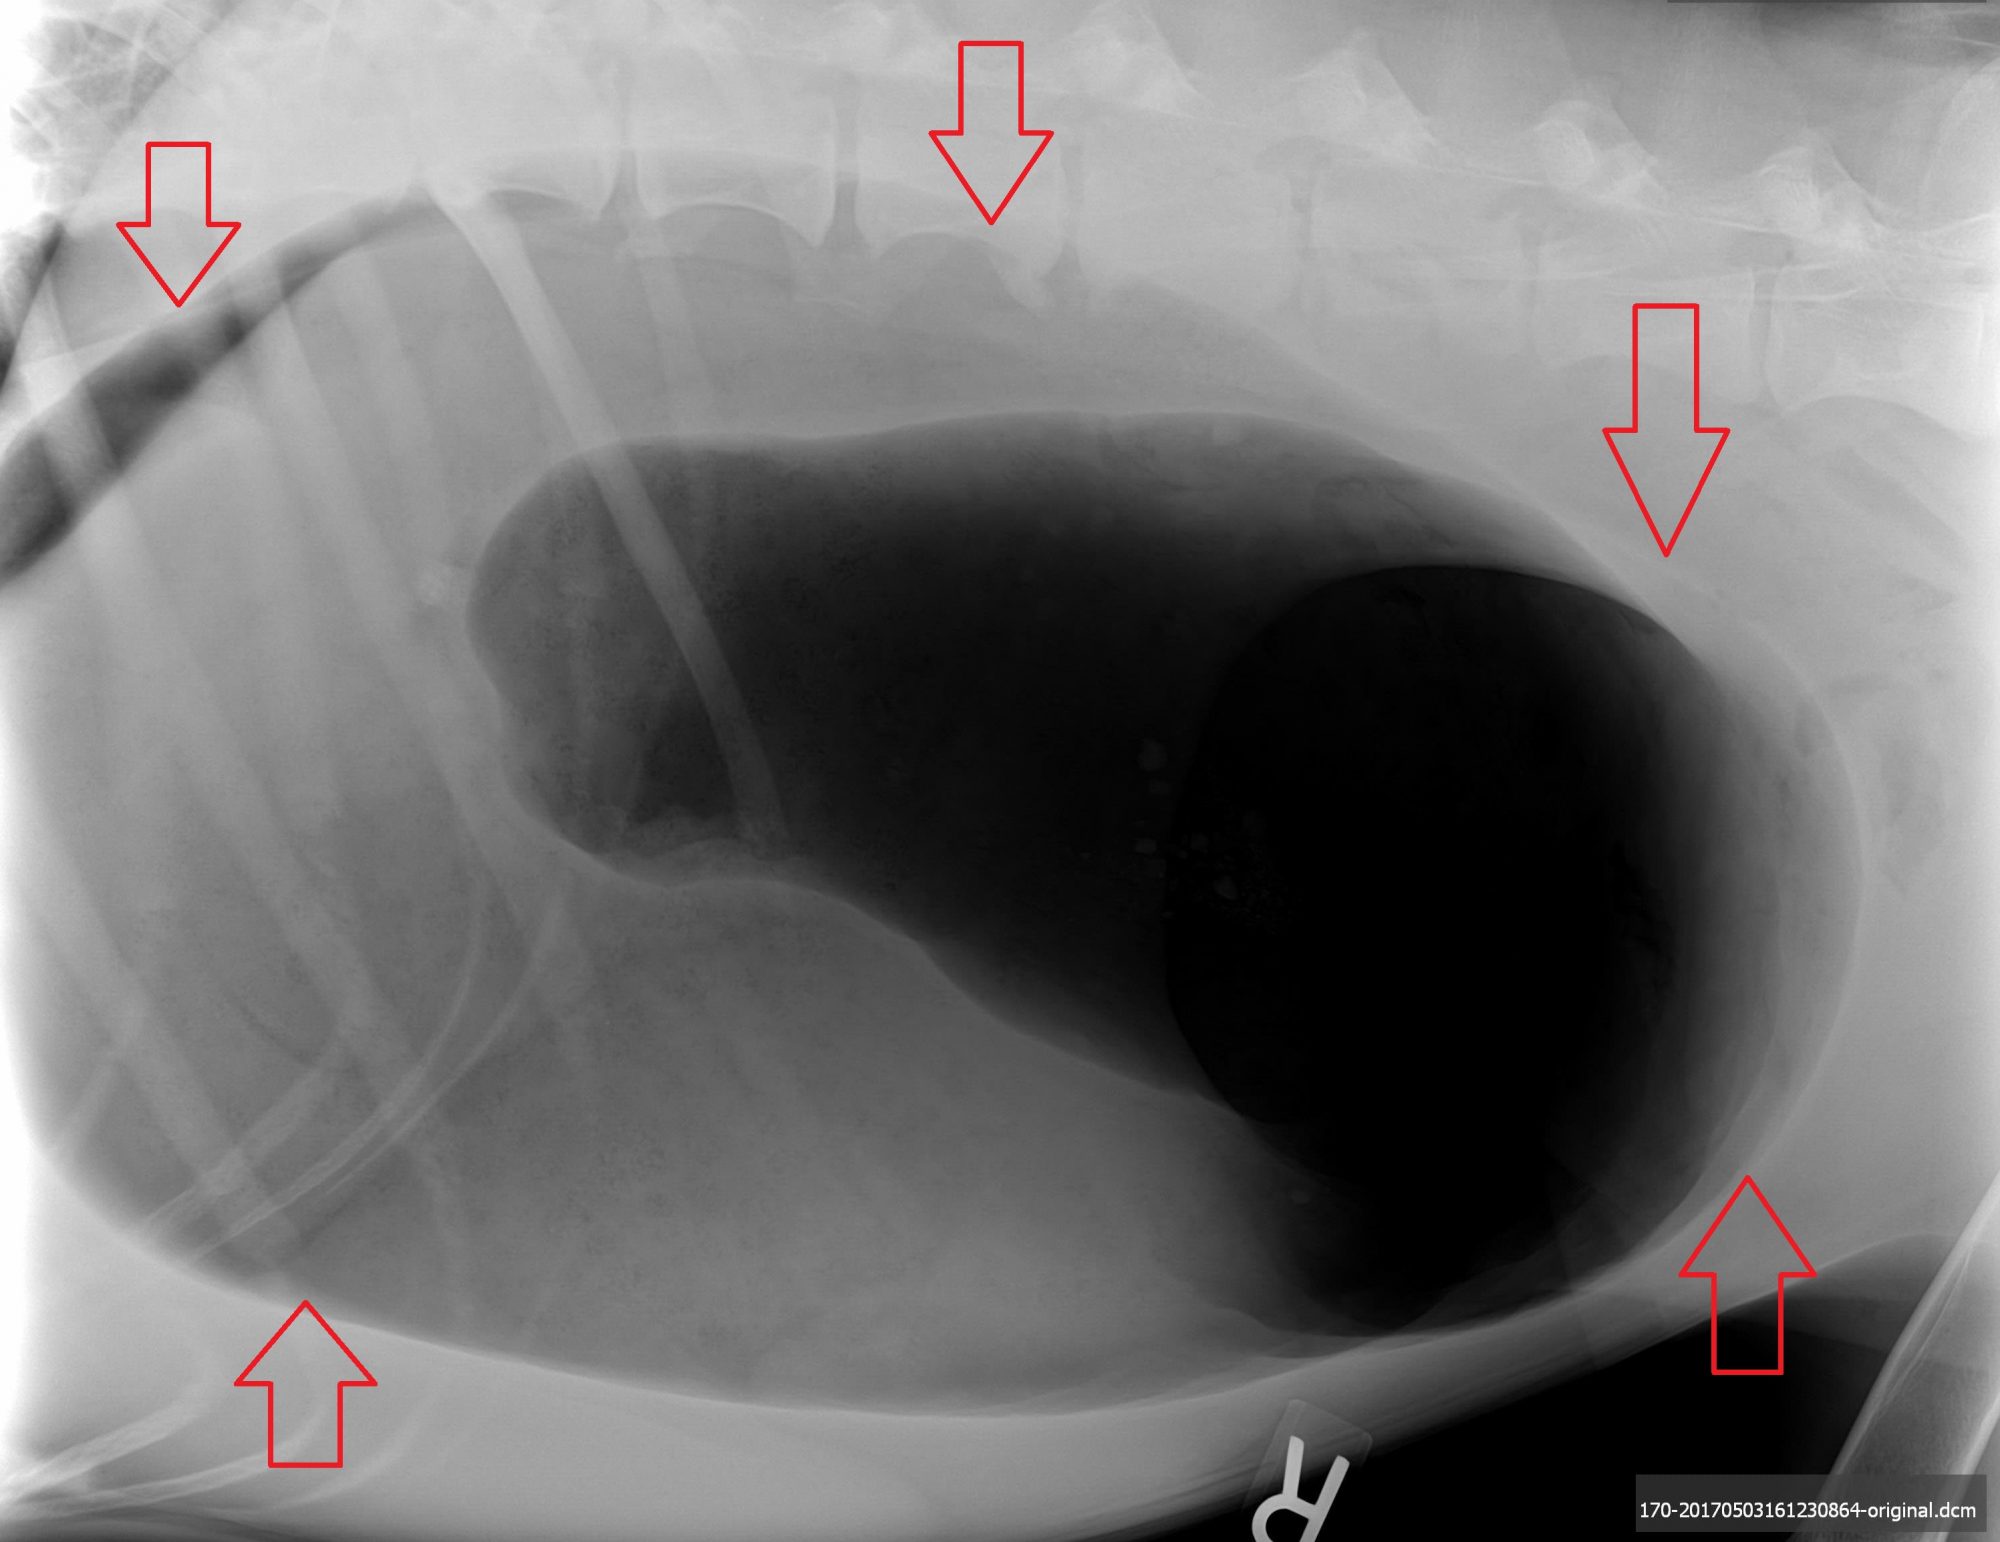 A classic example of the “single bubble” of GD in a German Shepherd. The arrows show the size of the stomach